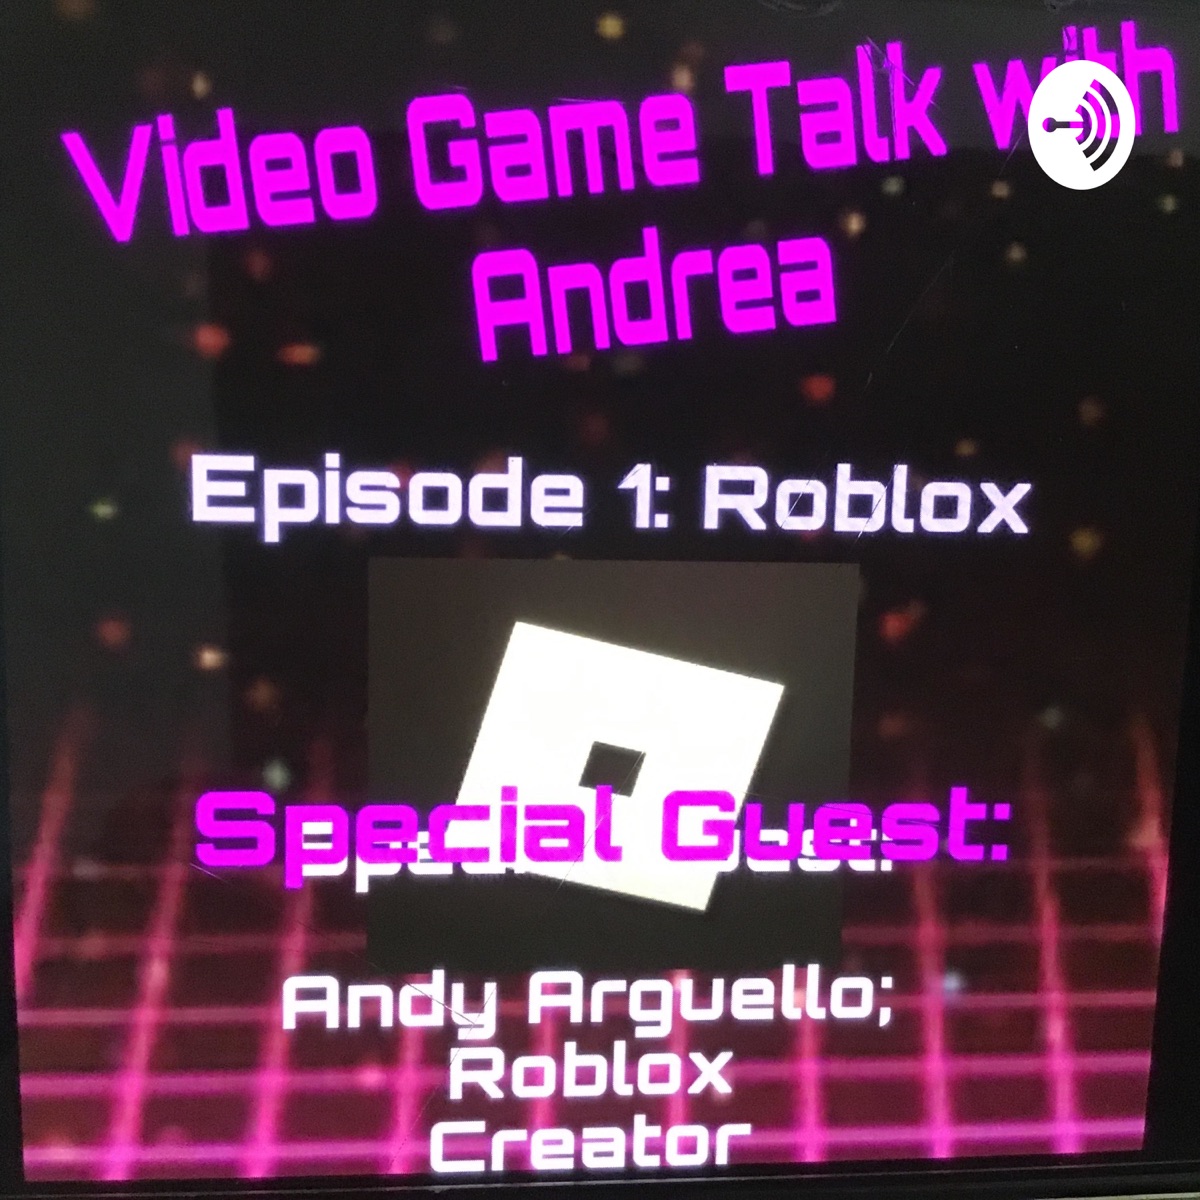 Related Roblox Podcast Podtail - roblox 1980's